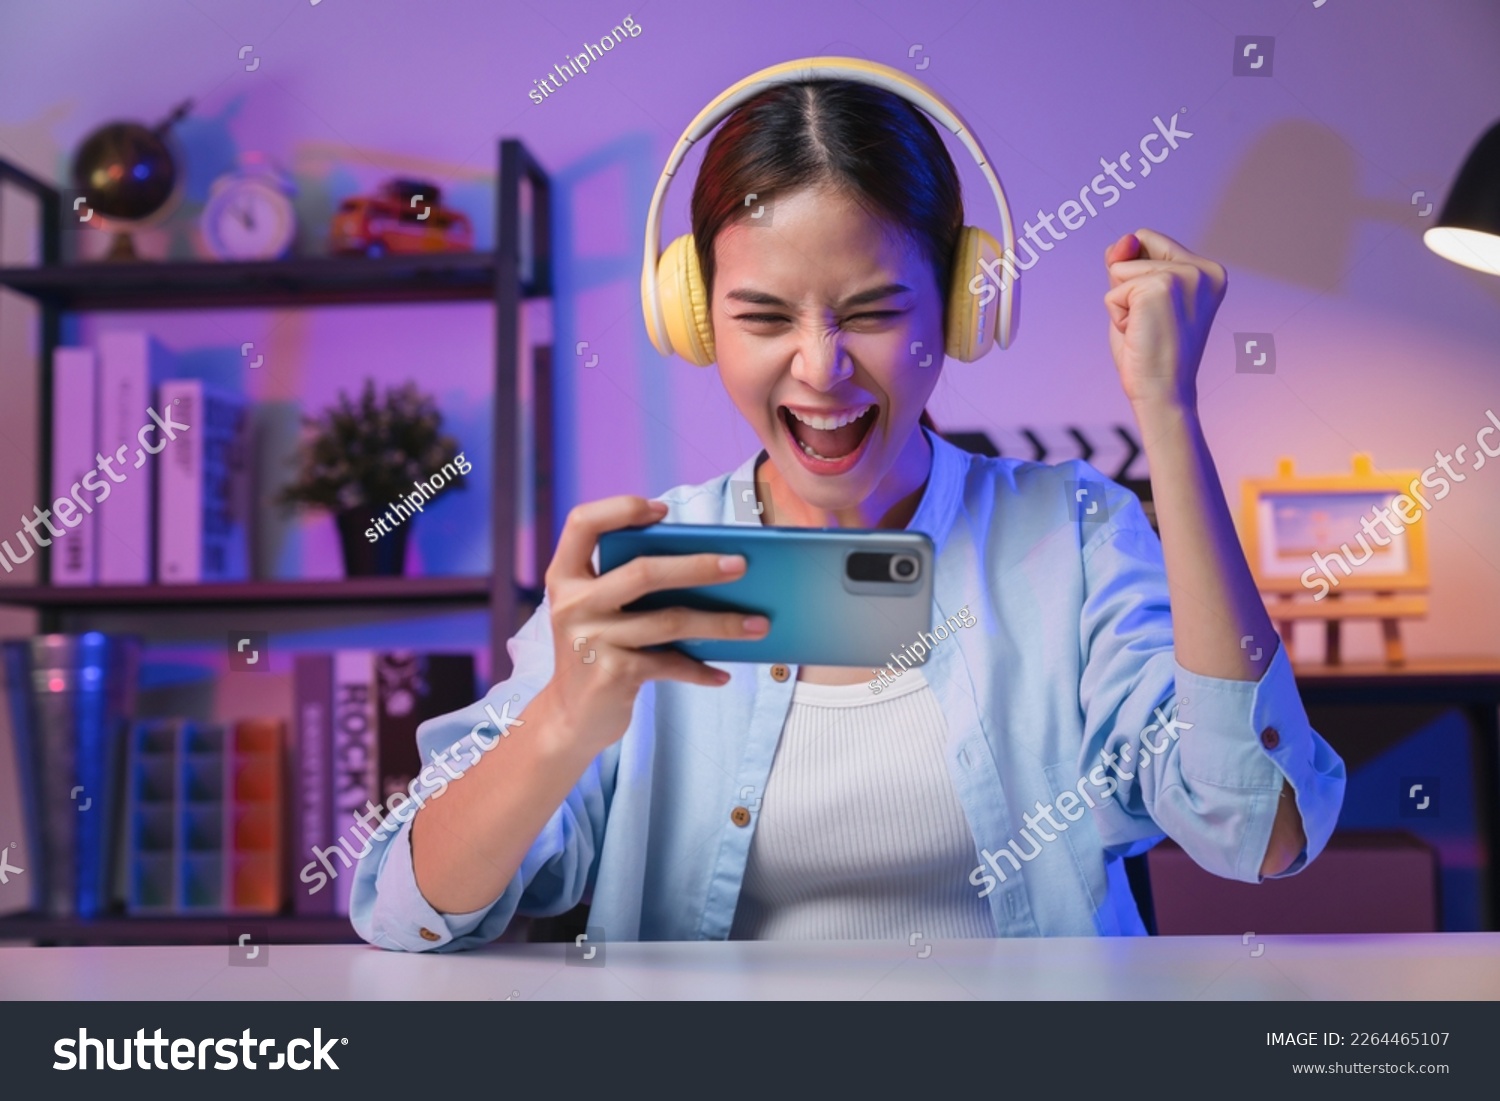 Excited Young Asian woman wearing headset and playing online game on smartphone at night modern house. #2264465107